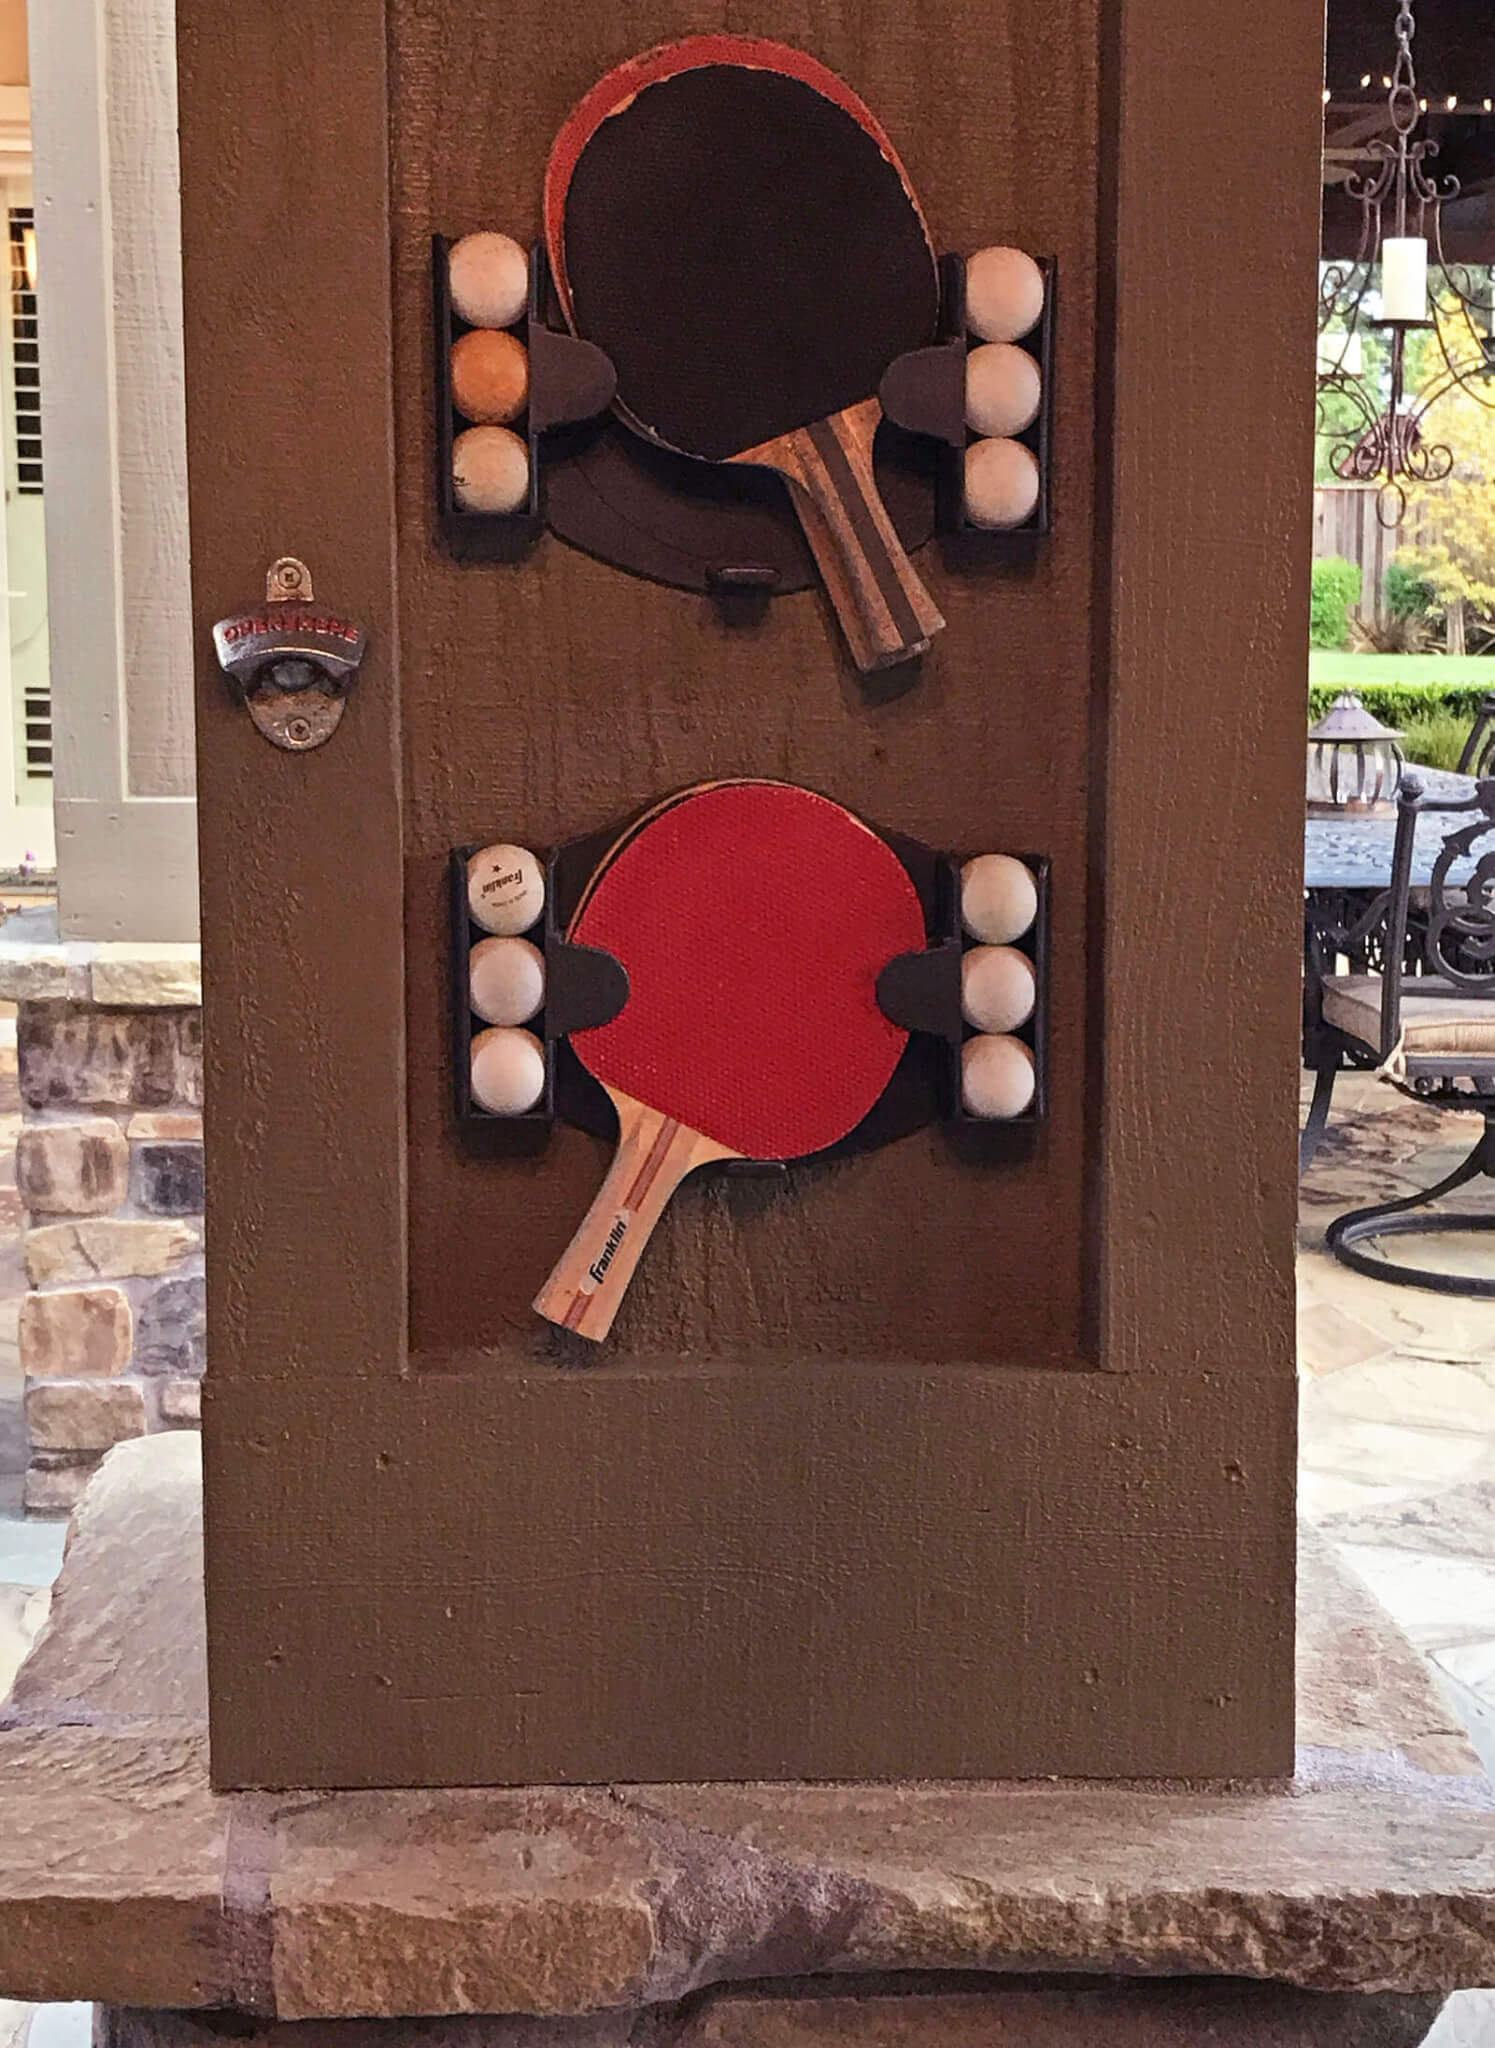 Play - Wall mounted ping pong game set, complete with bottle opener